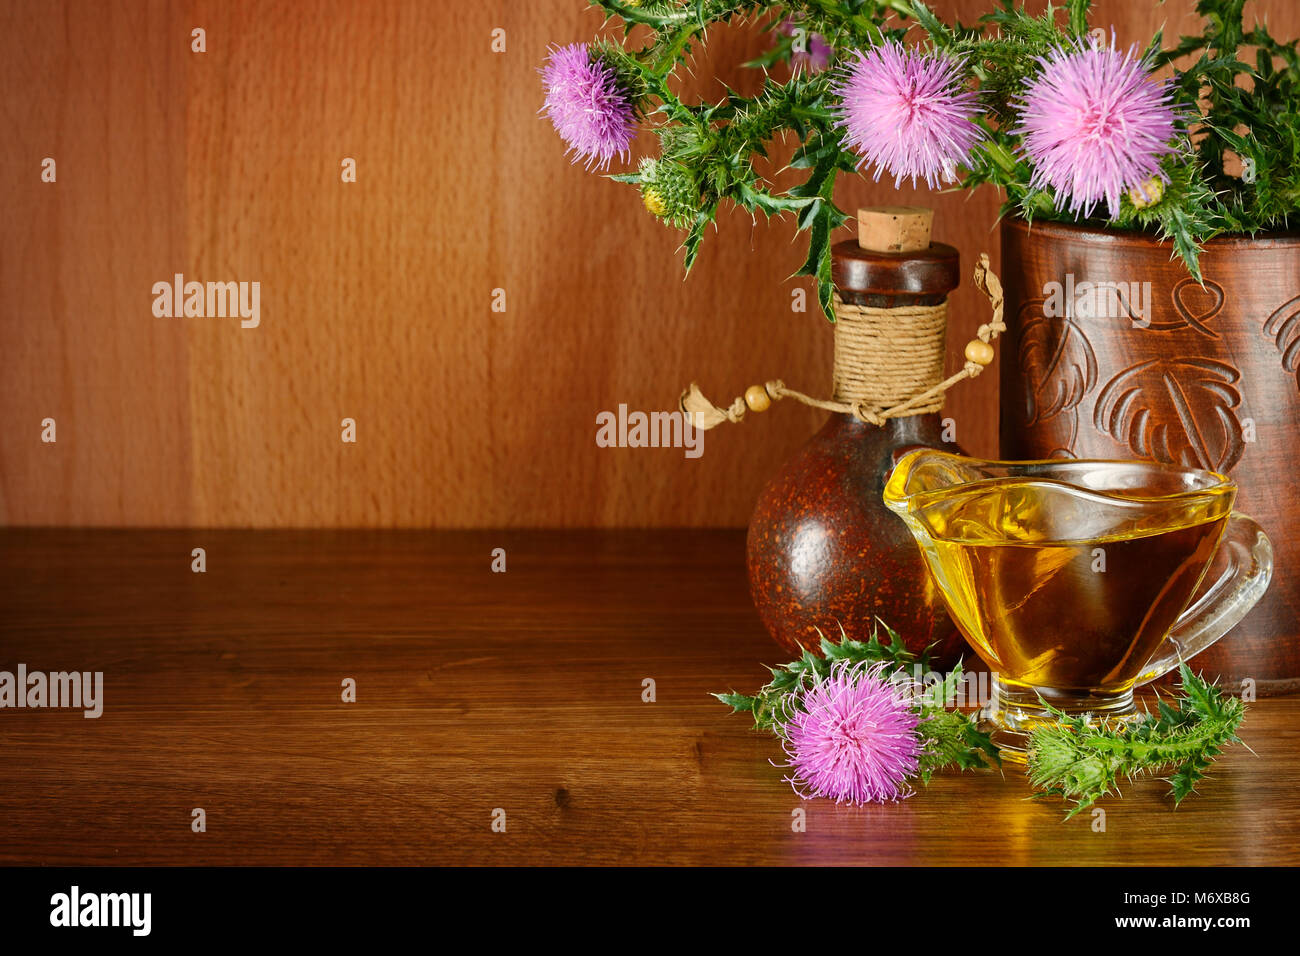 Flowering plant milk thistle and oil glass. Healing herb on wooden background. Free space for text. Stock Photo